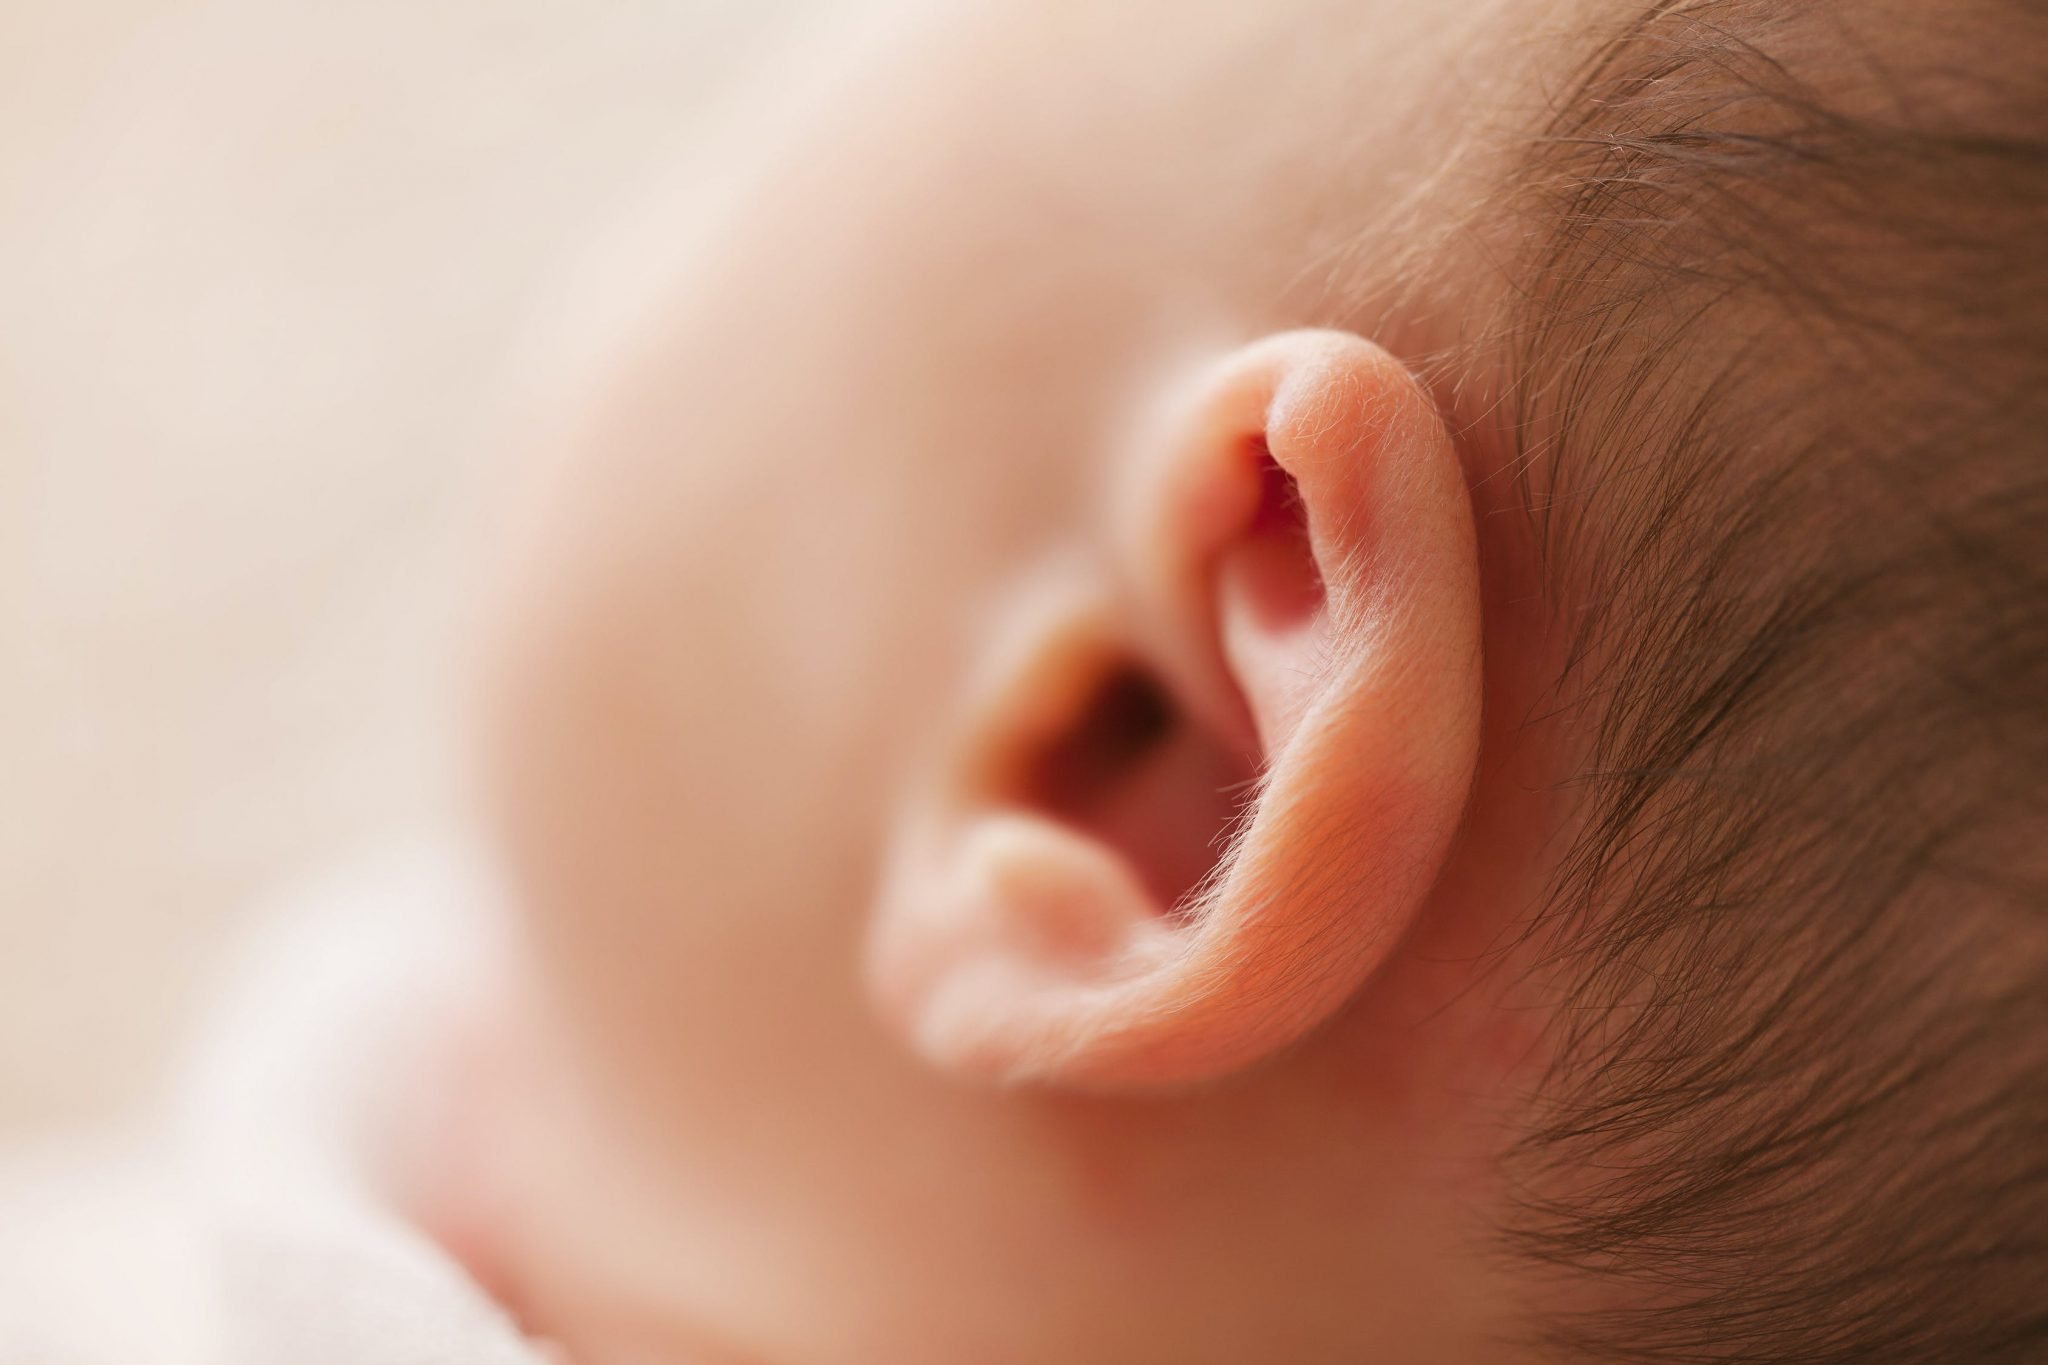 6 Things Every Parent Should Know About Ear Pain In Kids